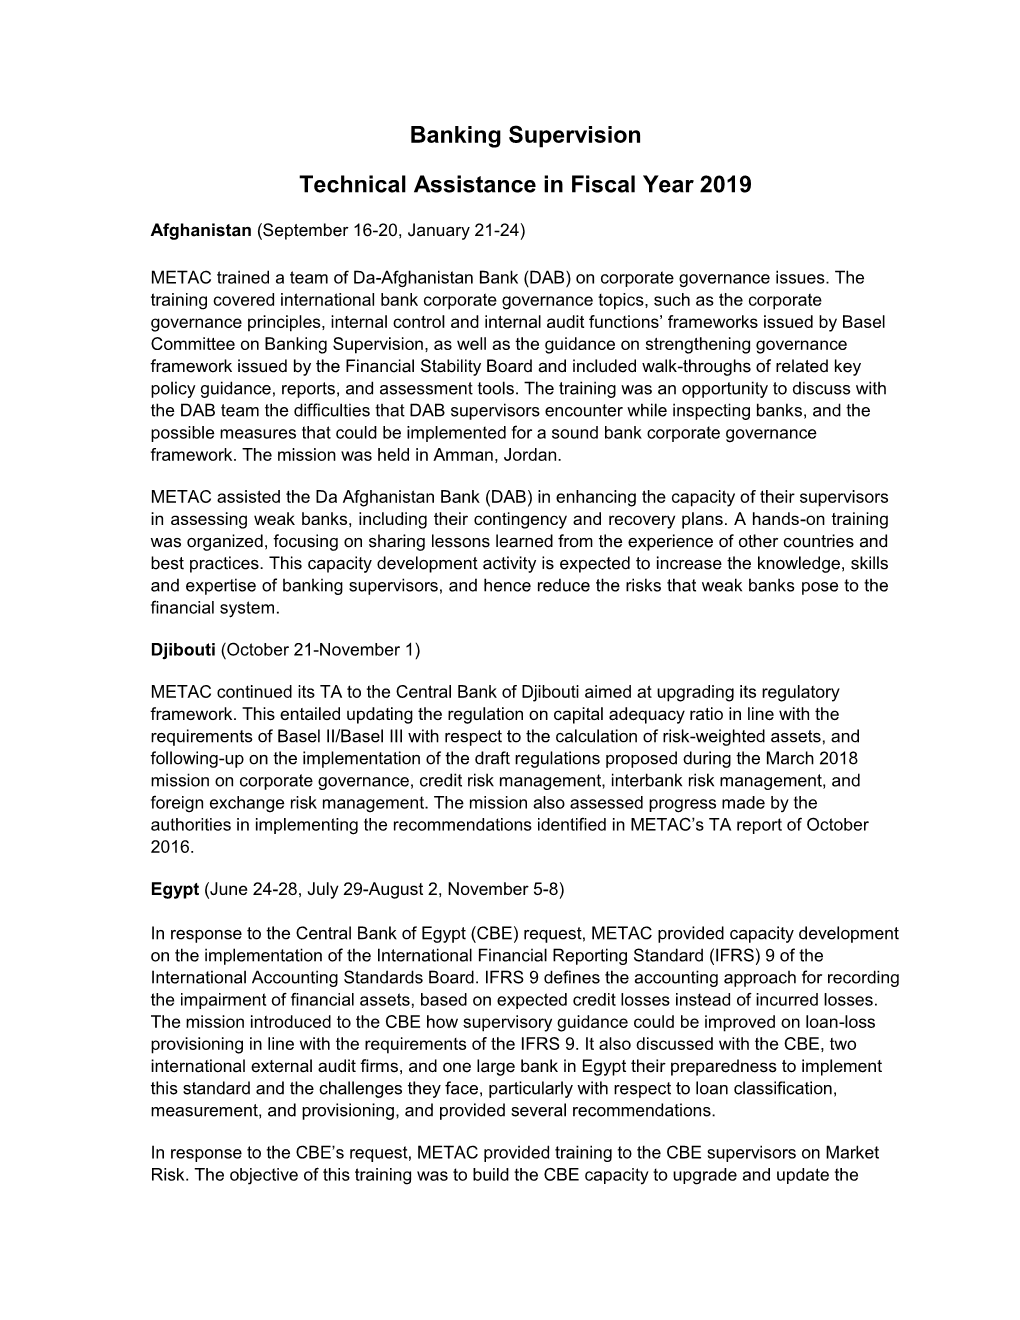 Banking Supervision Technical Assistance in Fiscal Year 2019